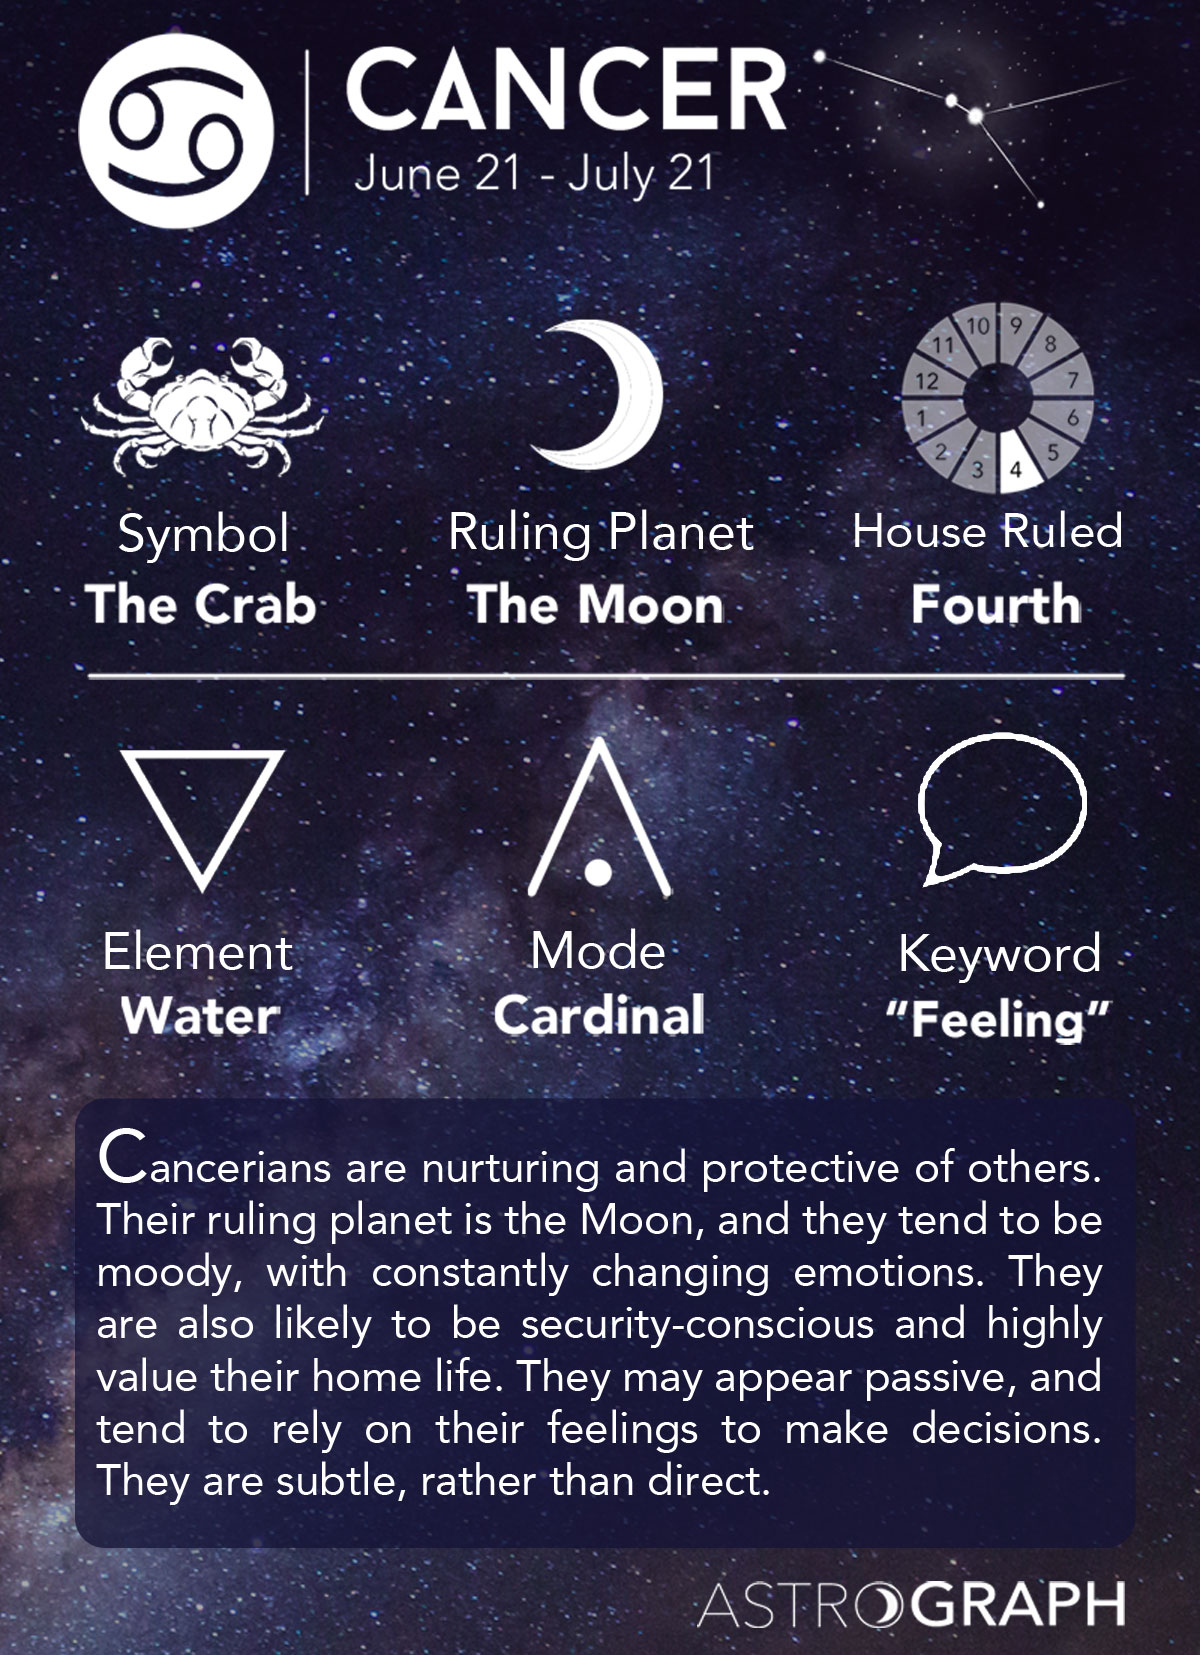 What Is A Cancer Zodiac Sign?